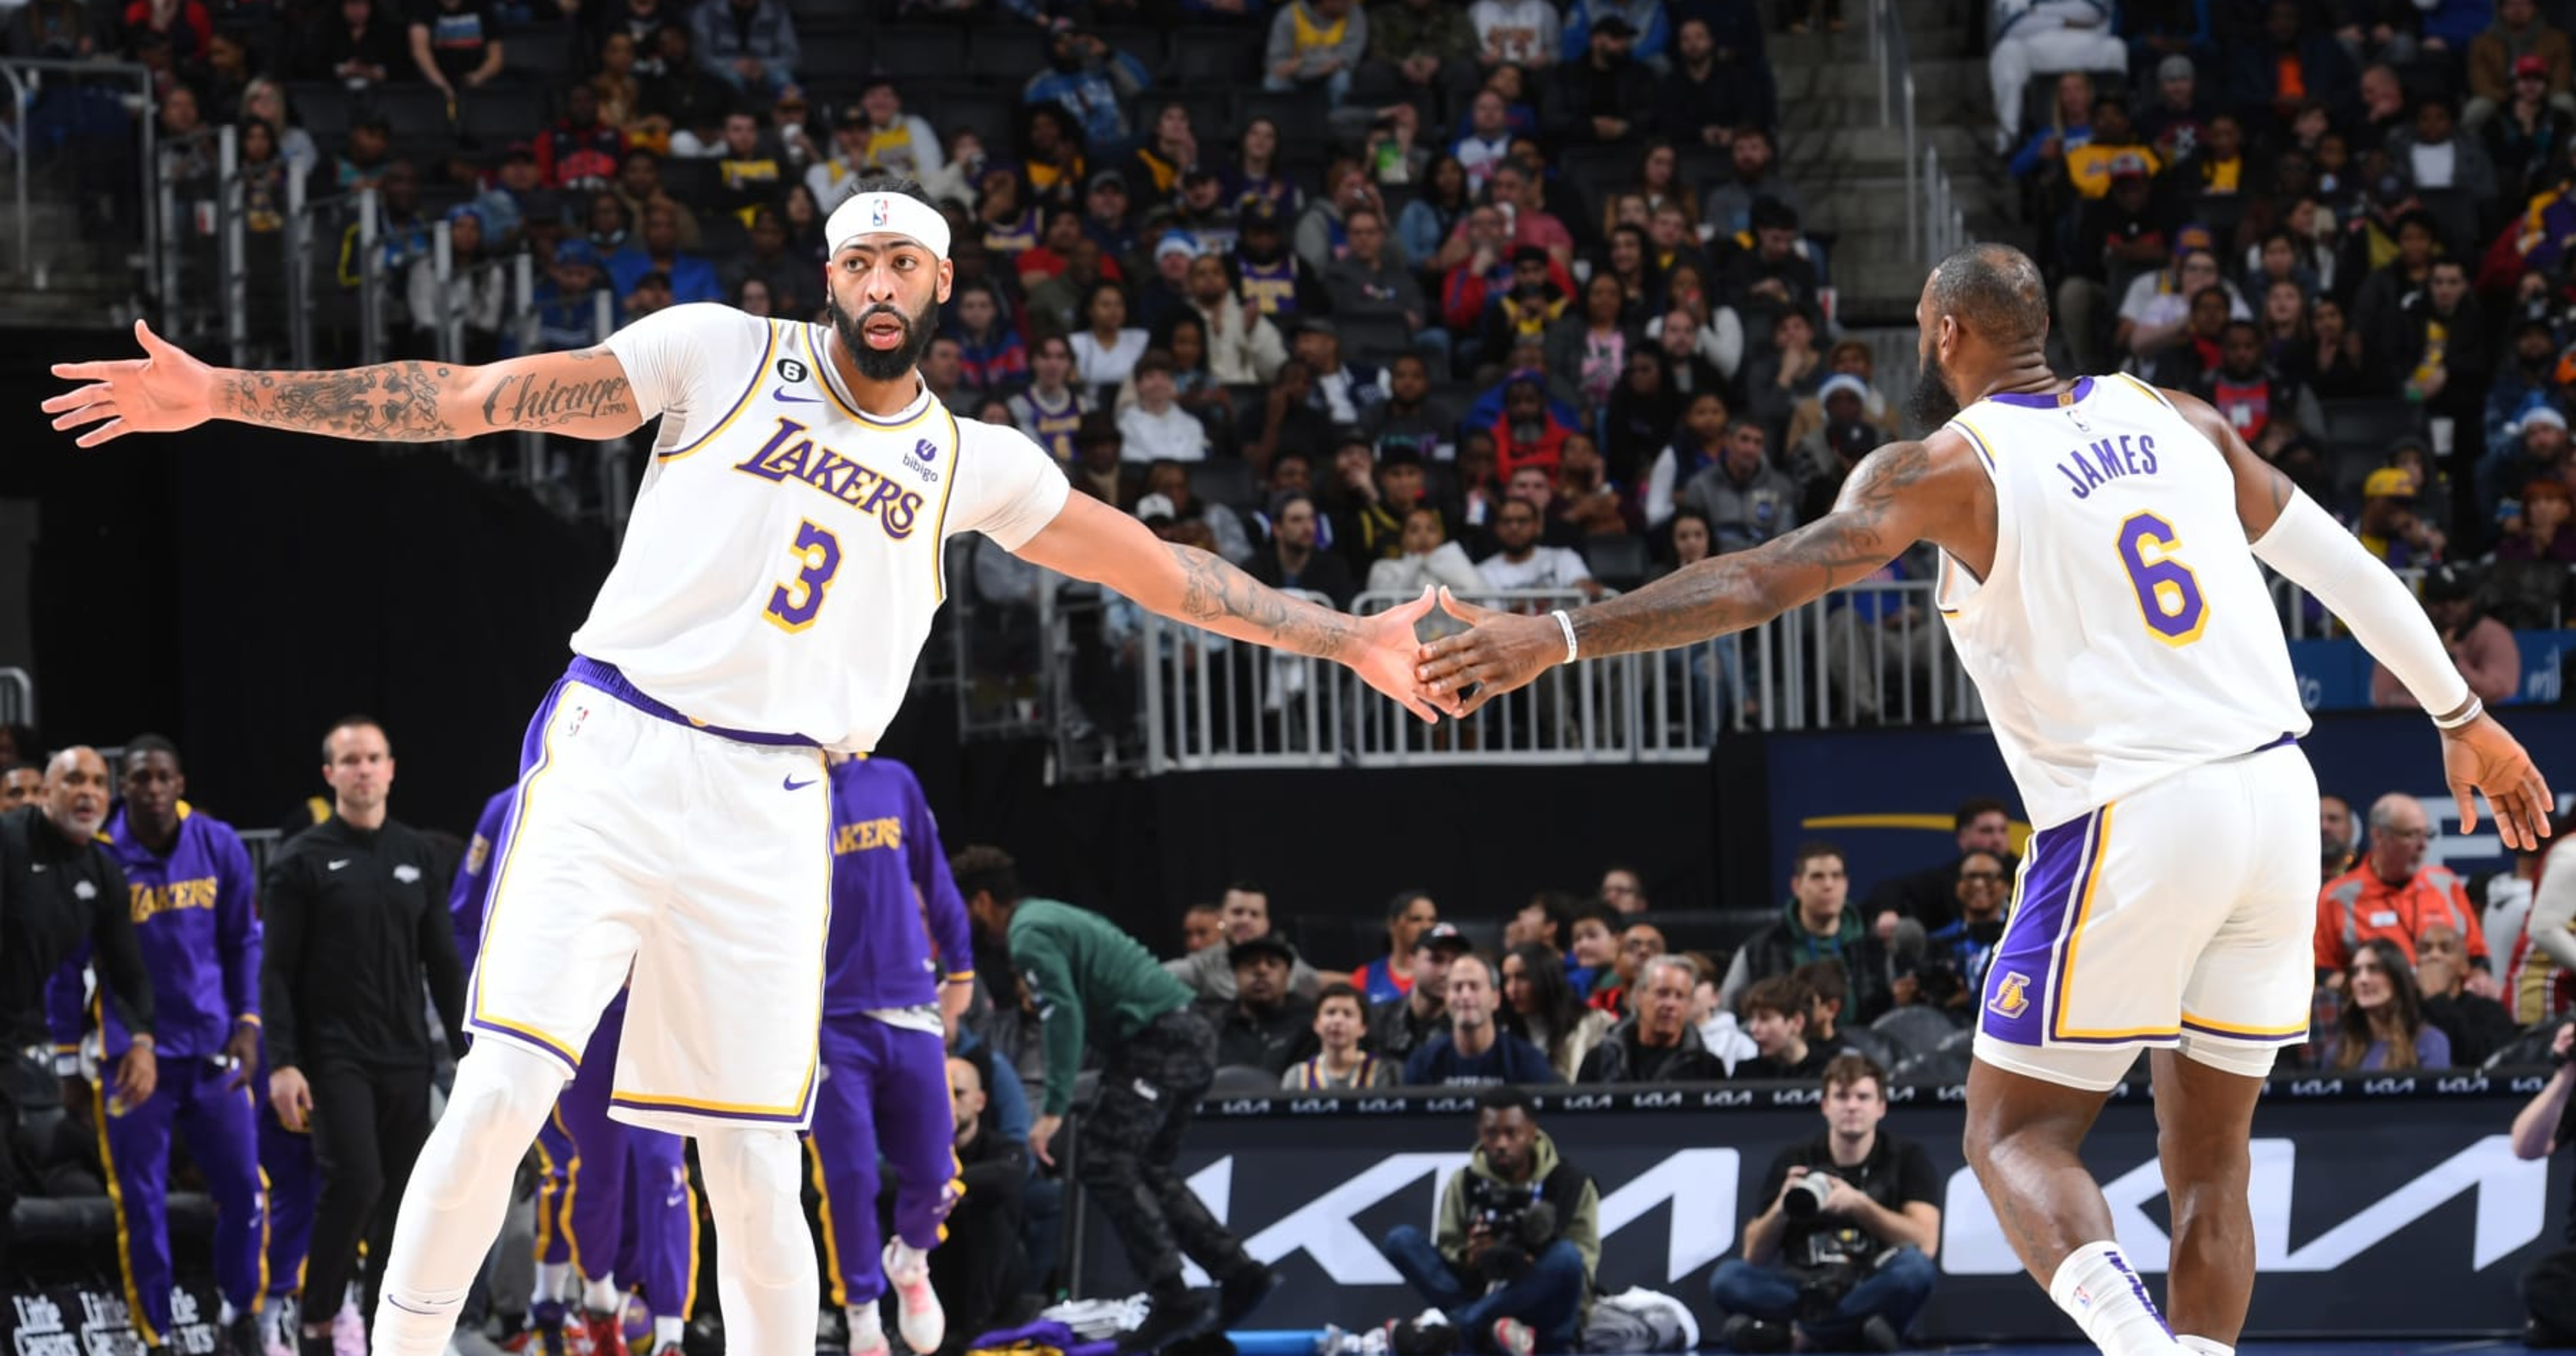 Anthony Davis 'On Another Planet' as LeBron James, Lakers Defeat Pistons